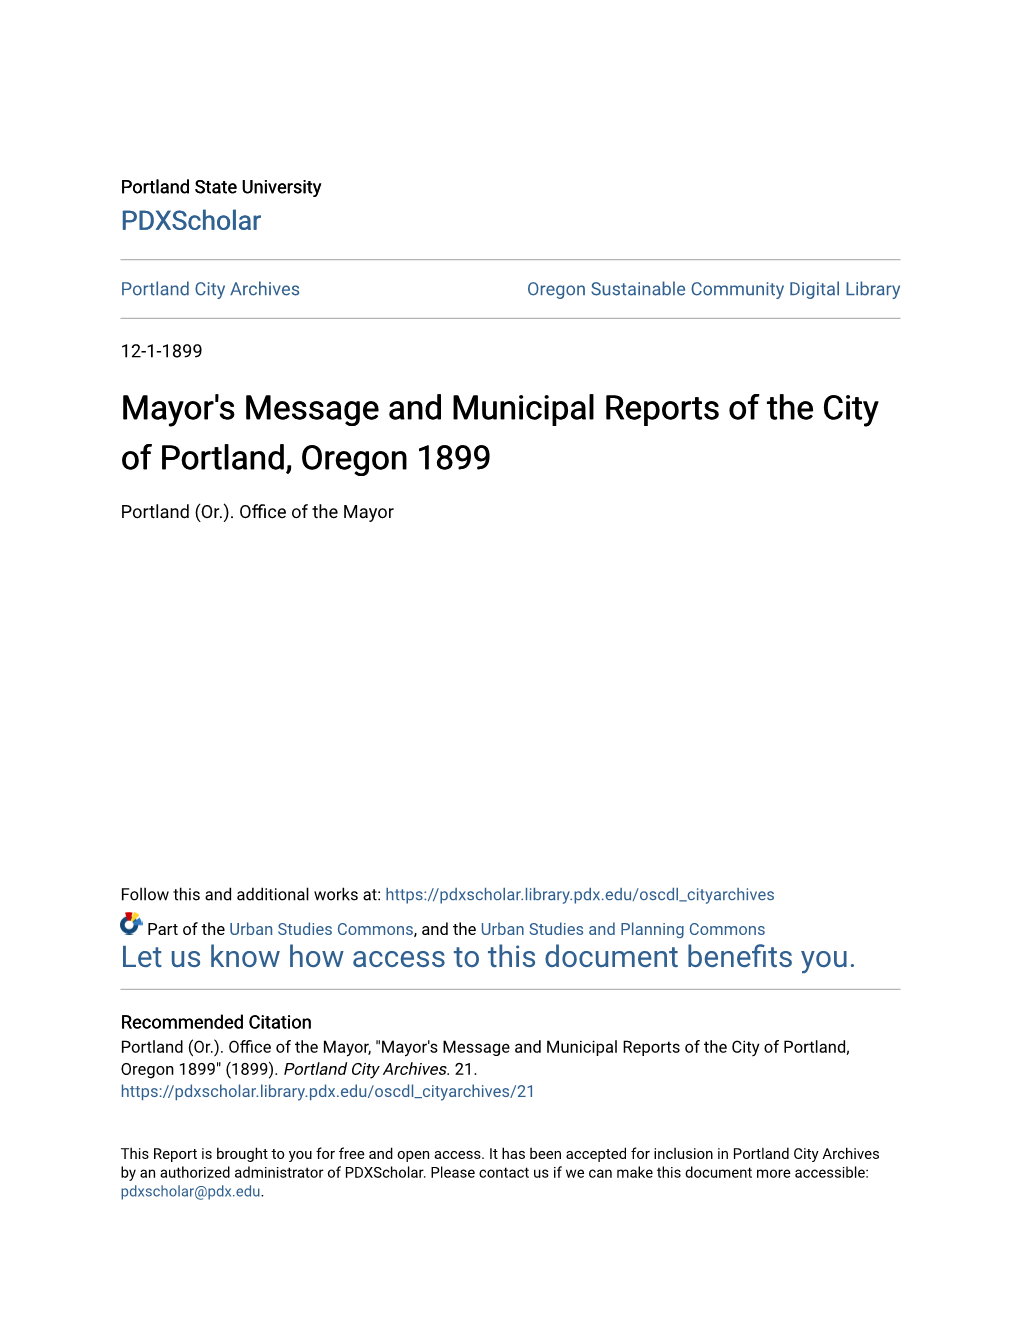 Mayor's Message and Municipal Reports of the City of Portland, Oregon 1899